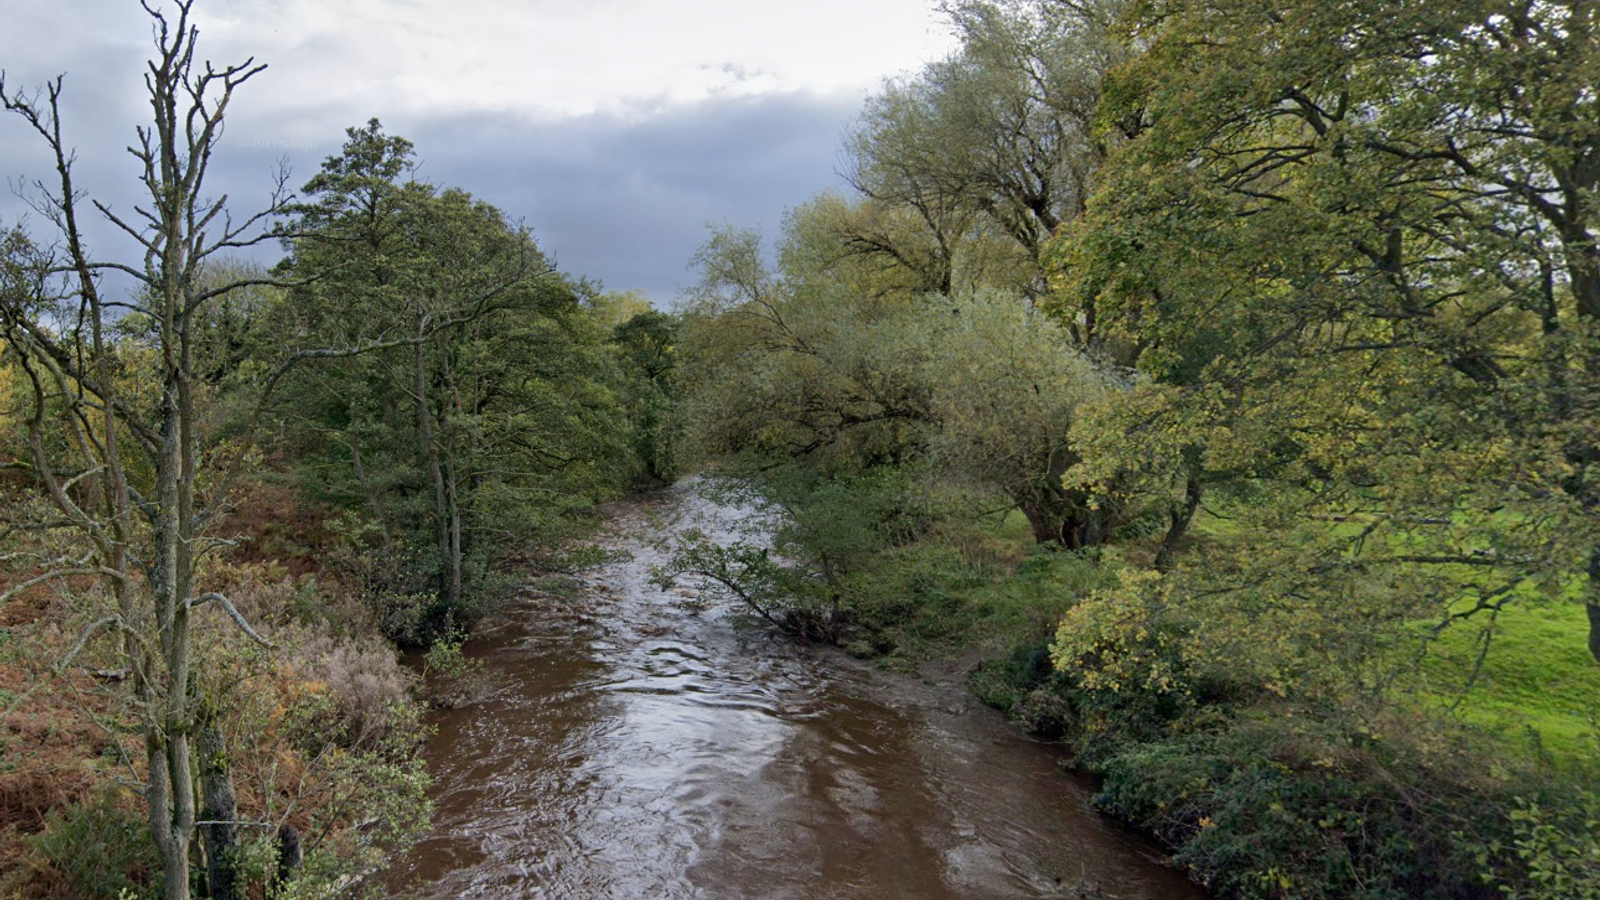 Three men die after becoming trapped in 4x4 in Yorkshire river